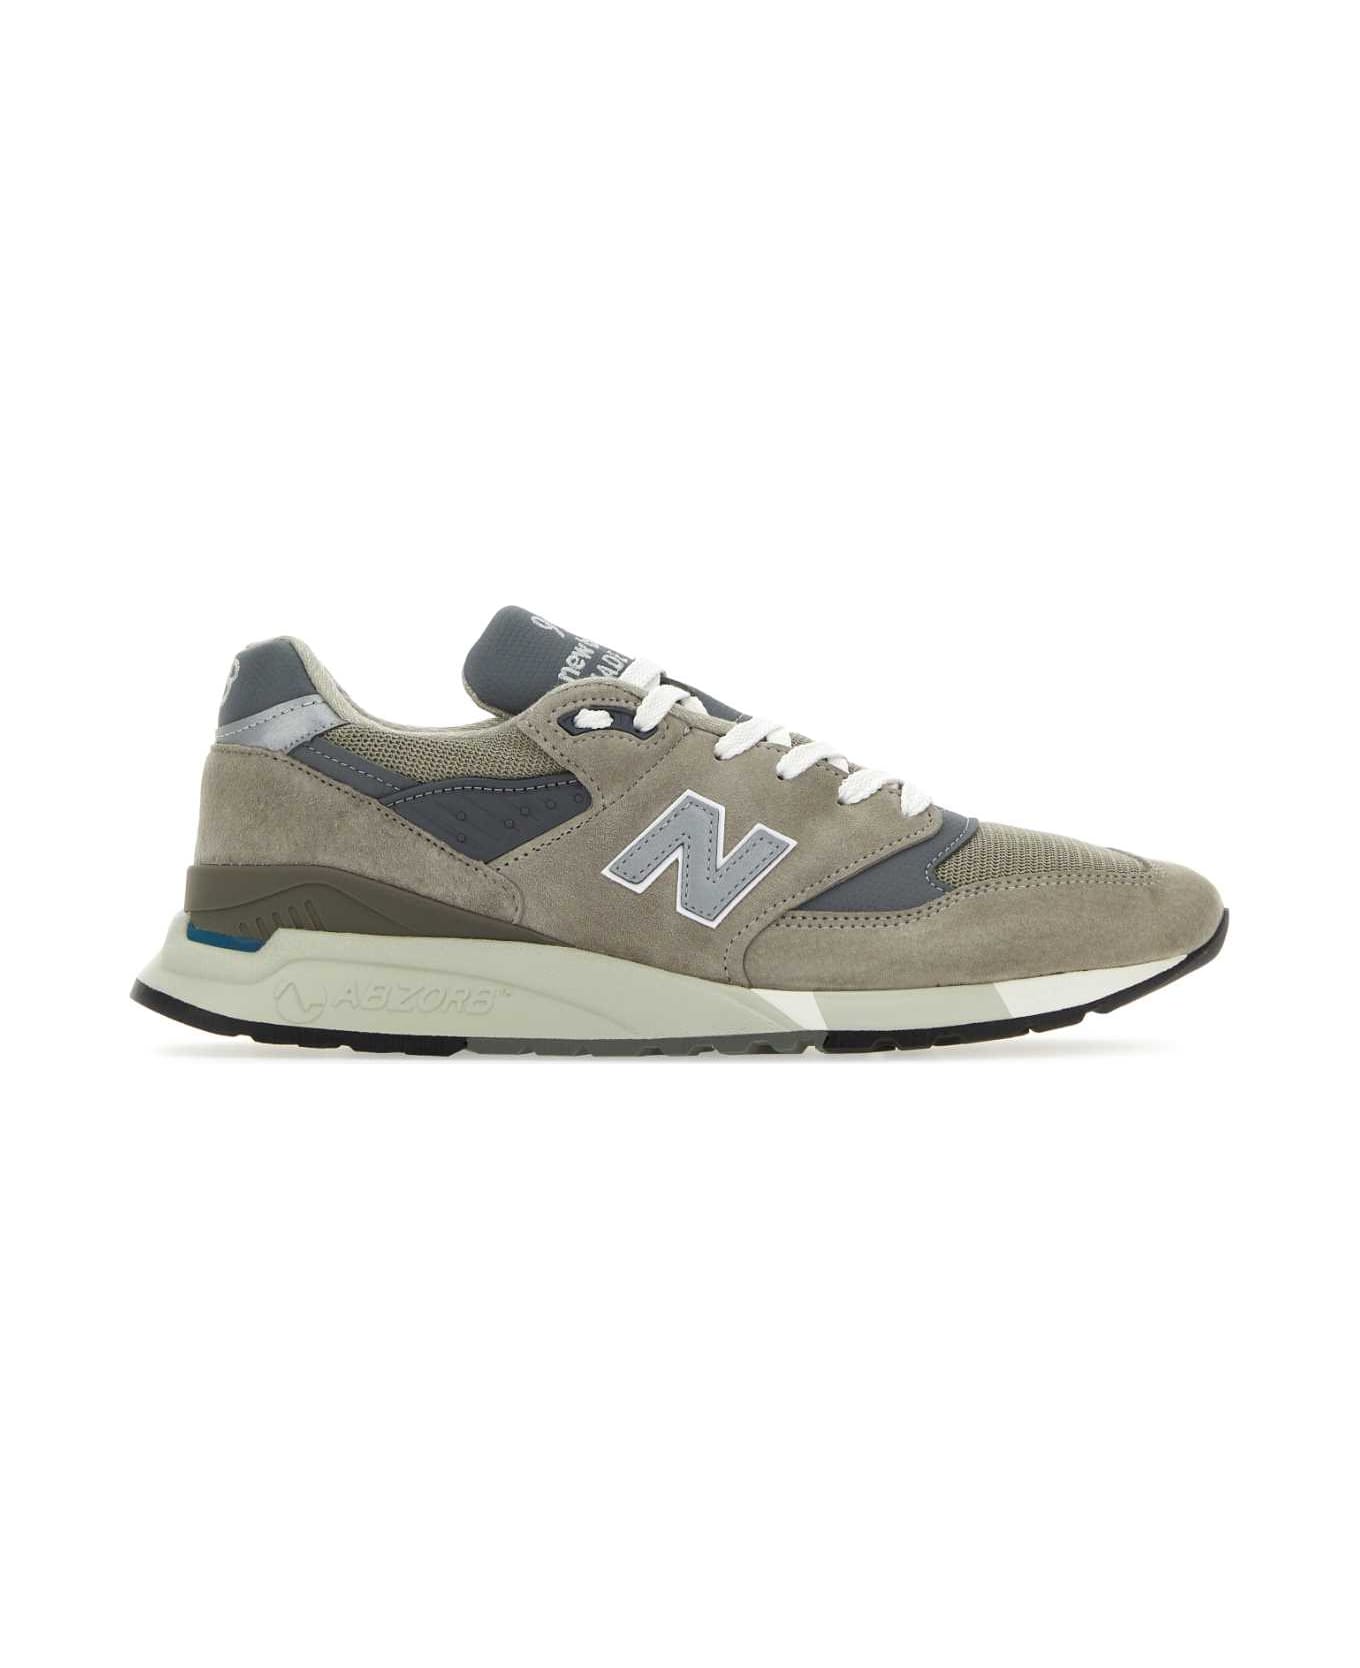 New Balance Multicolor Suede And Fabric U998gr Sneakers - GREY スニーカー